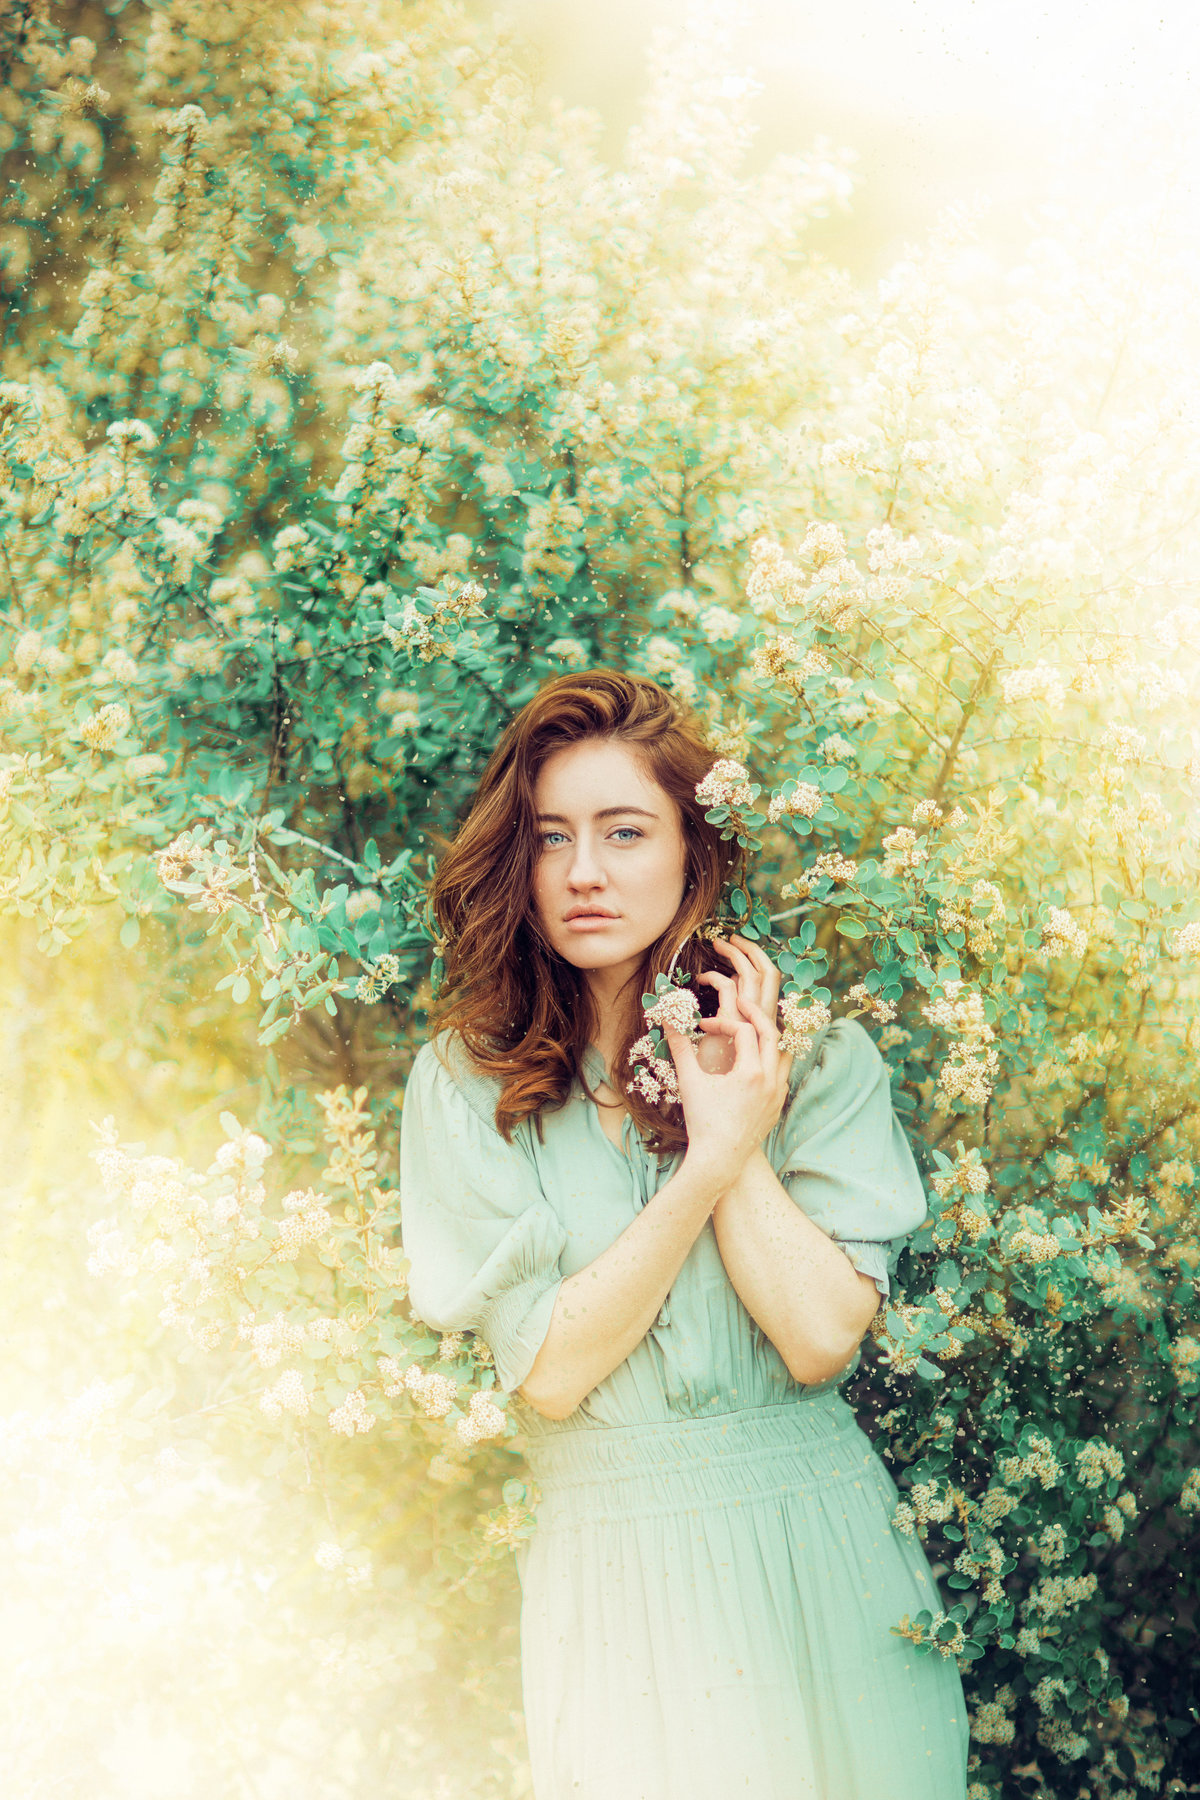 Portrait Photo Of Young Woman Holding Planted Flowers Los Angeles